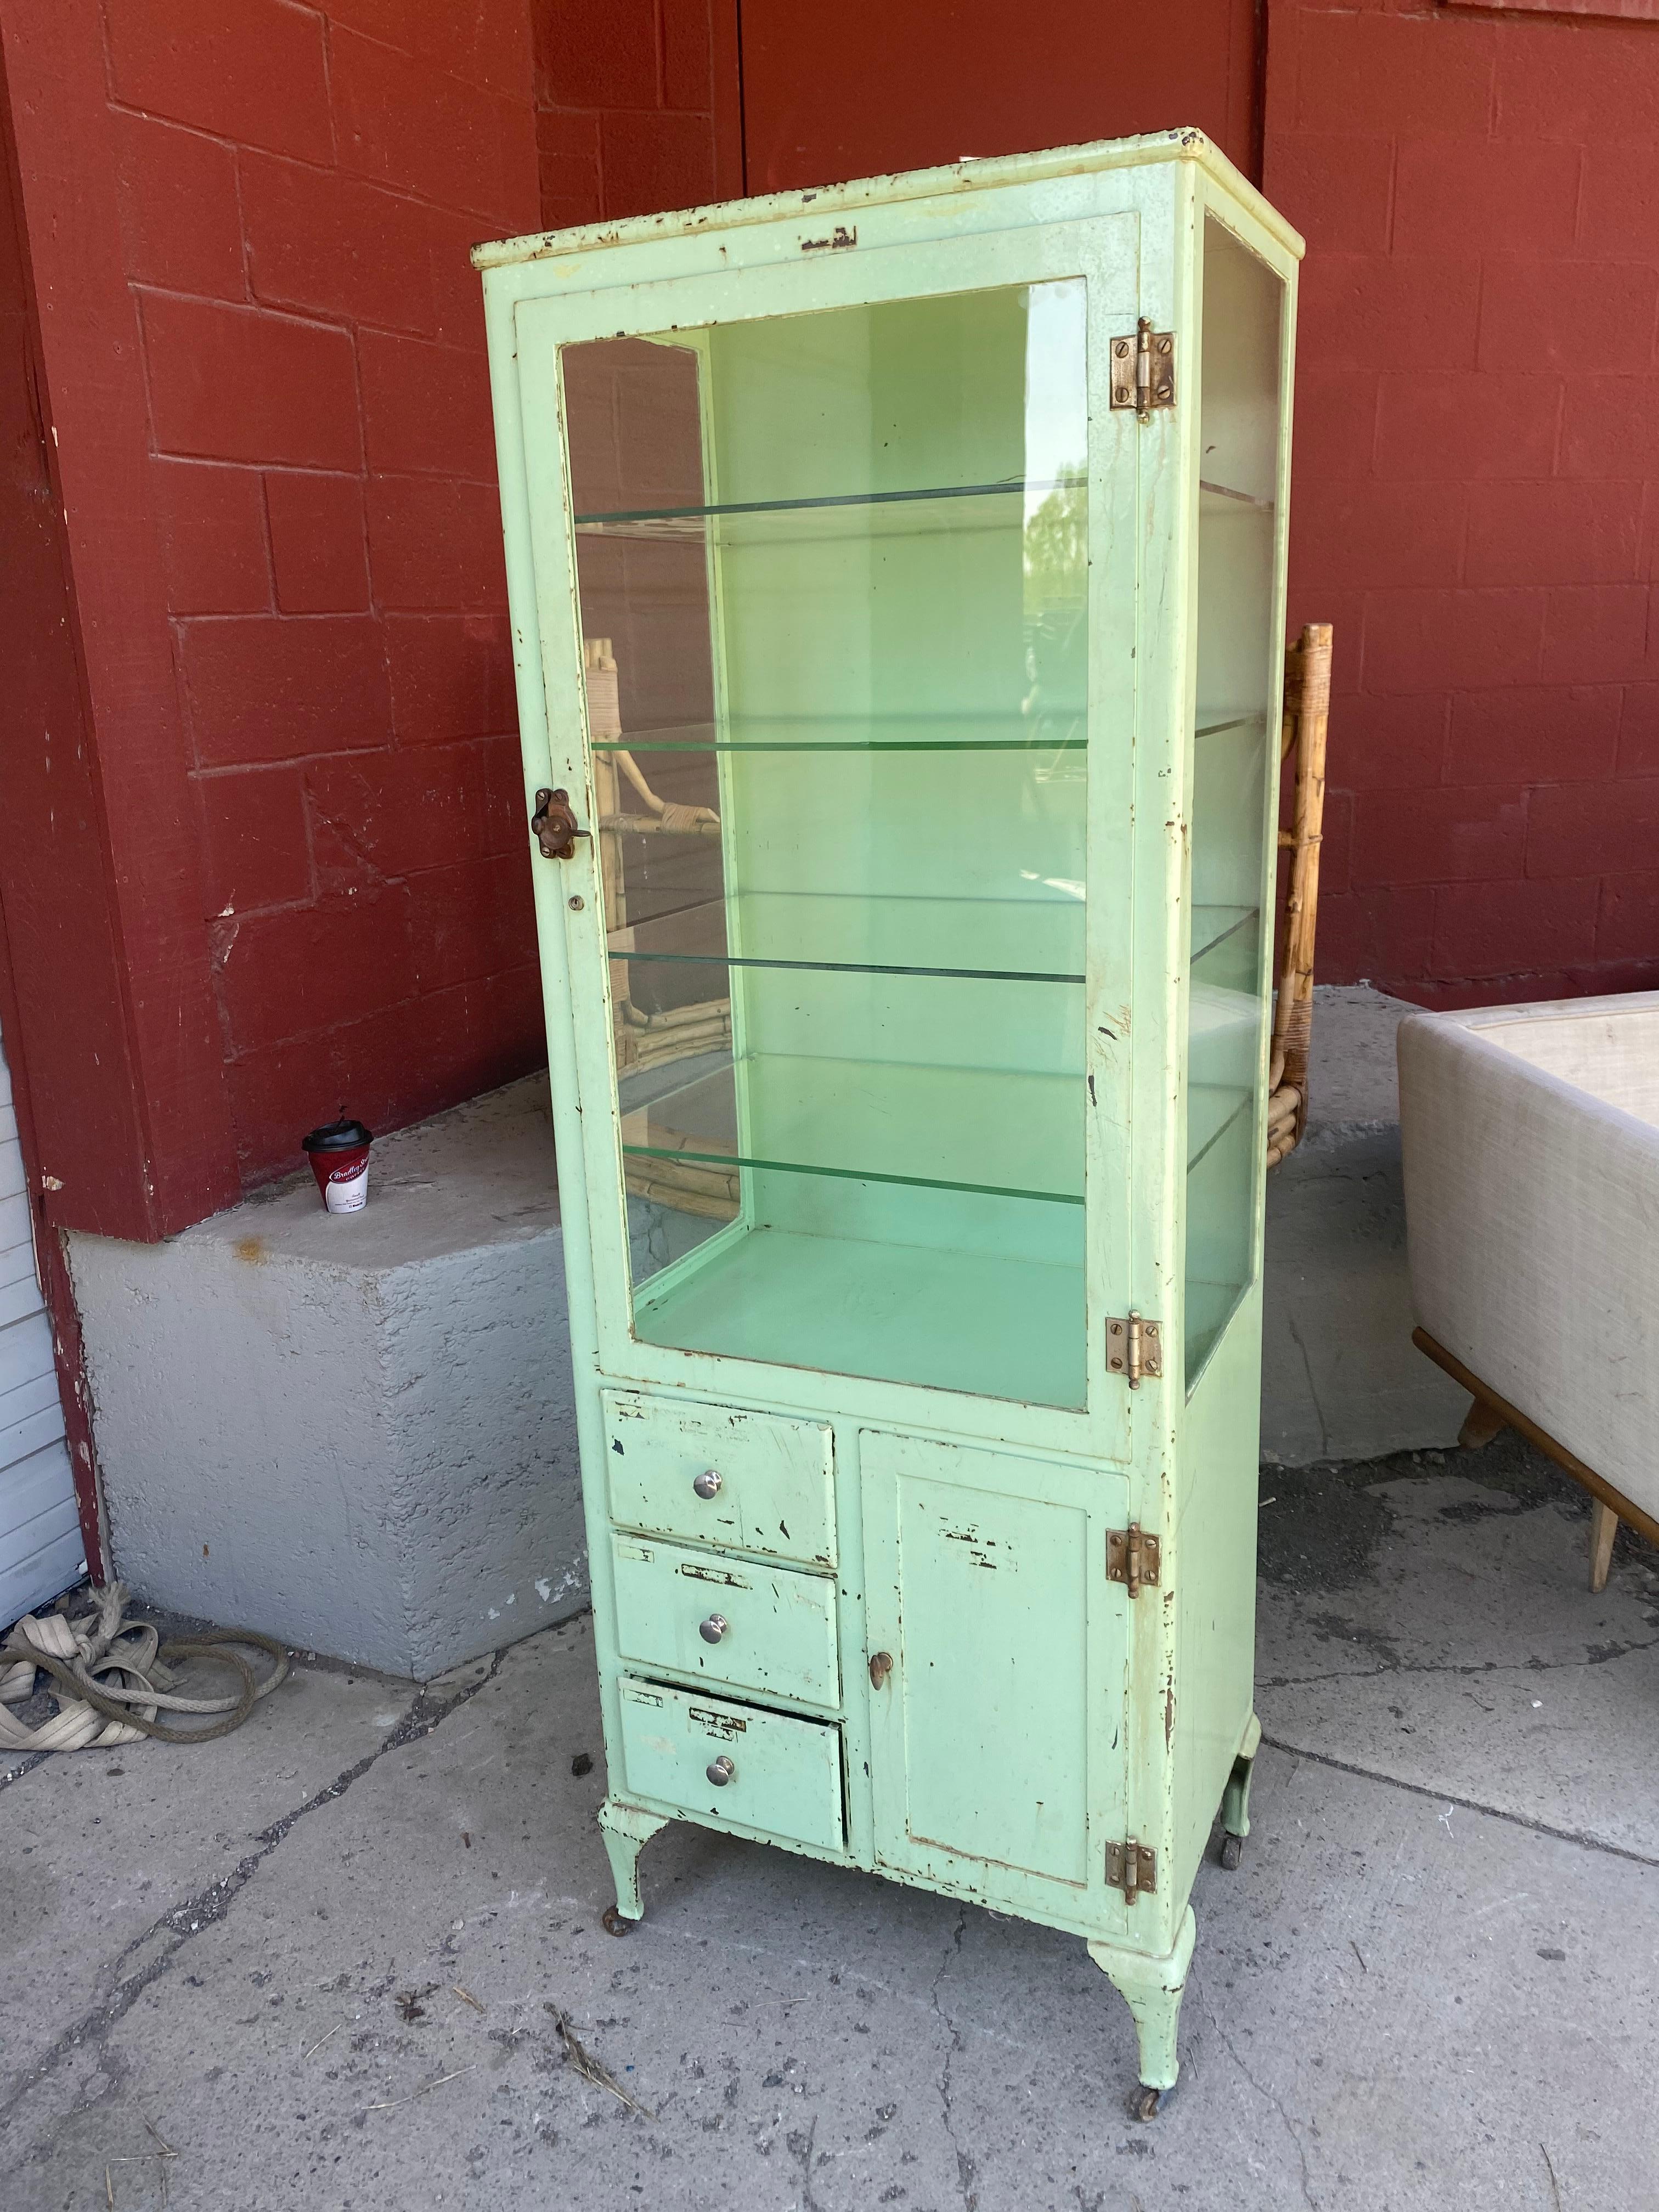 American Classic Industrial / Architectural Medical, Dr's Cabinet, Storage, Display